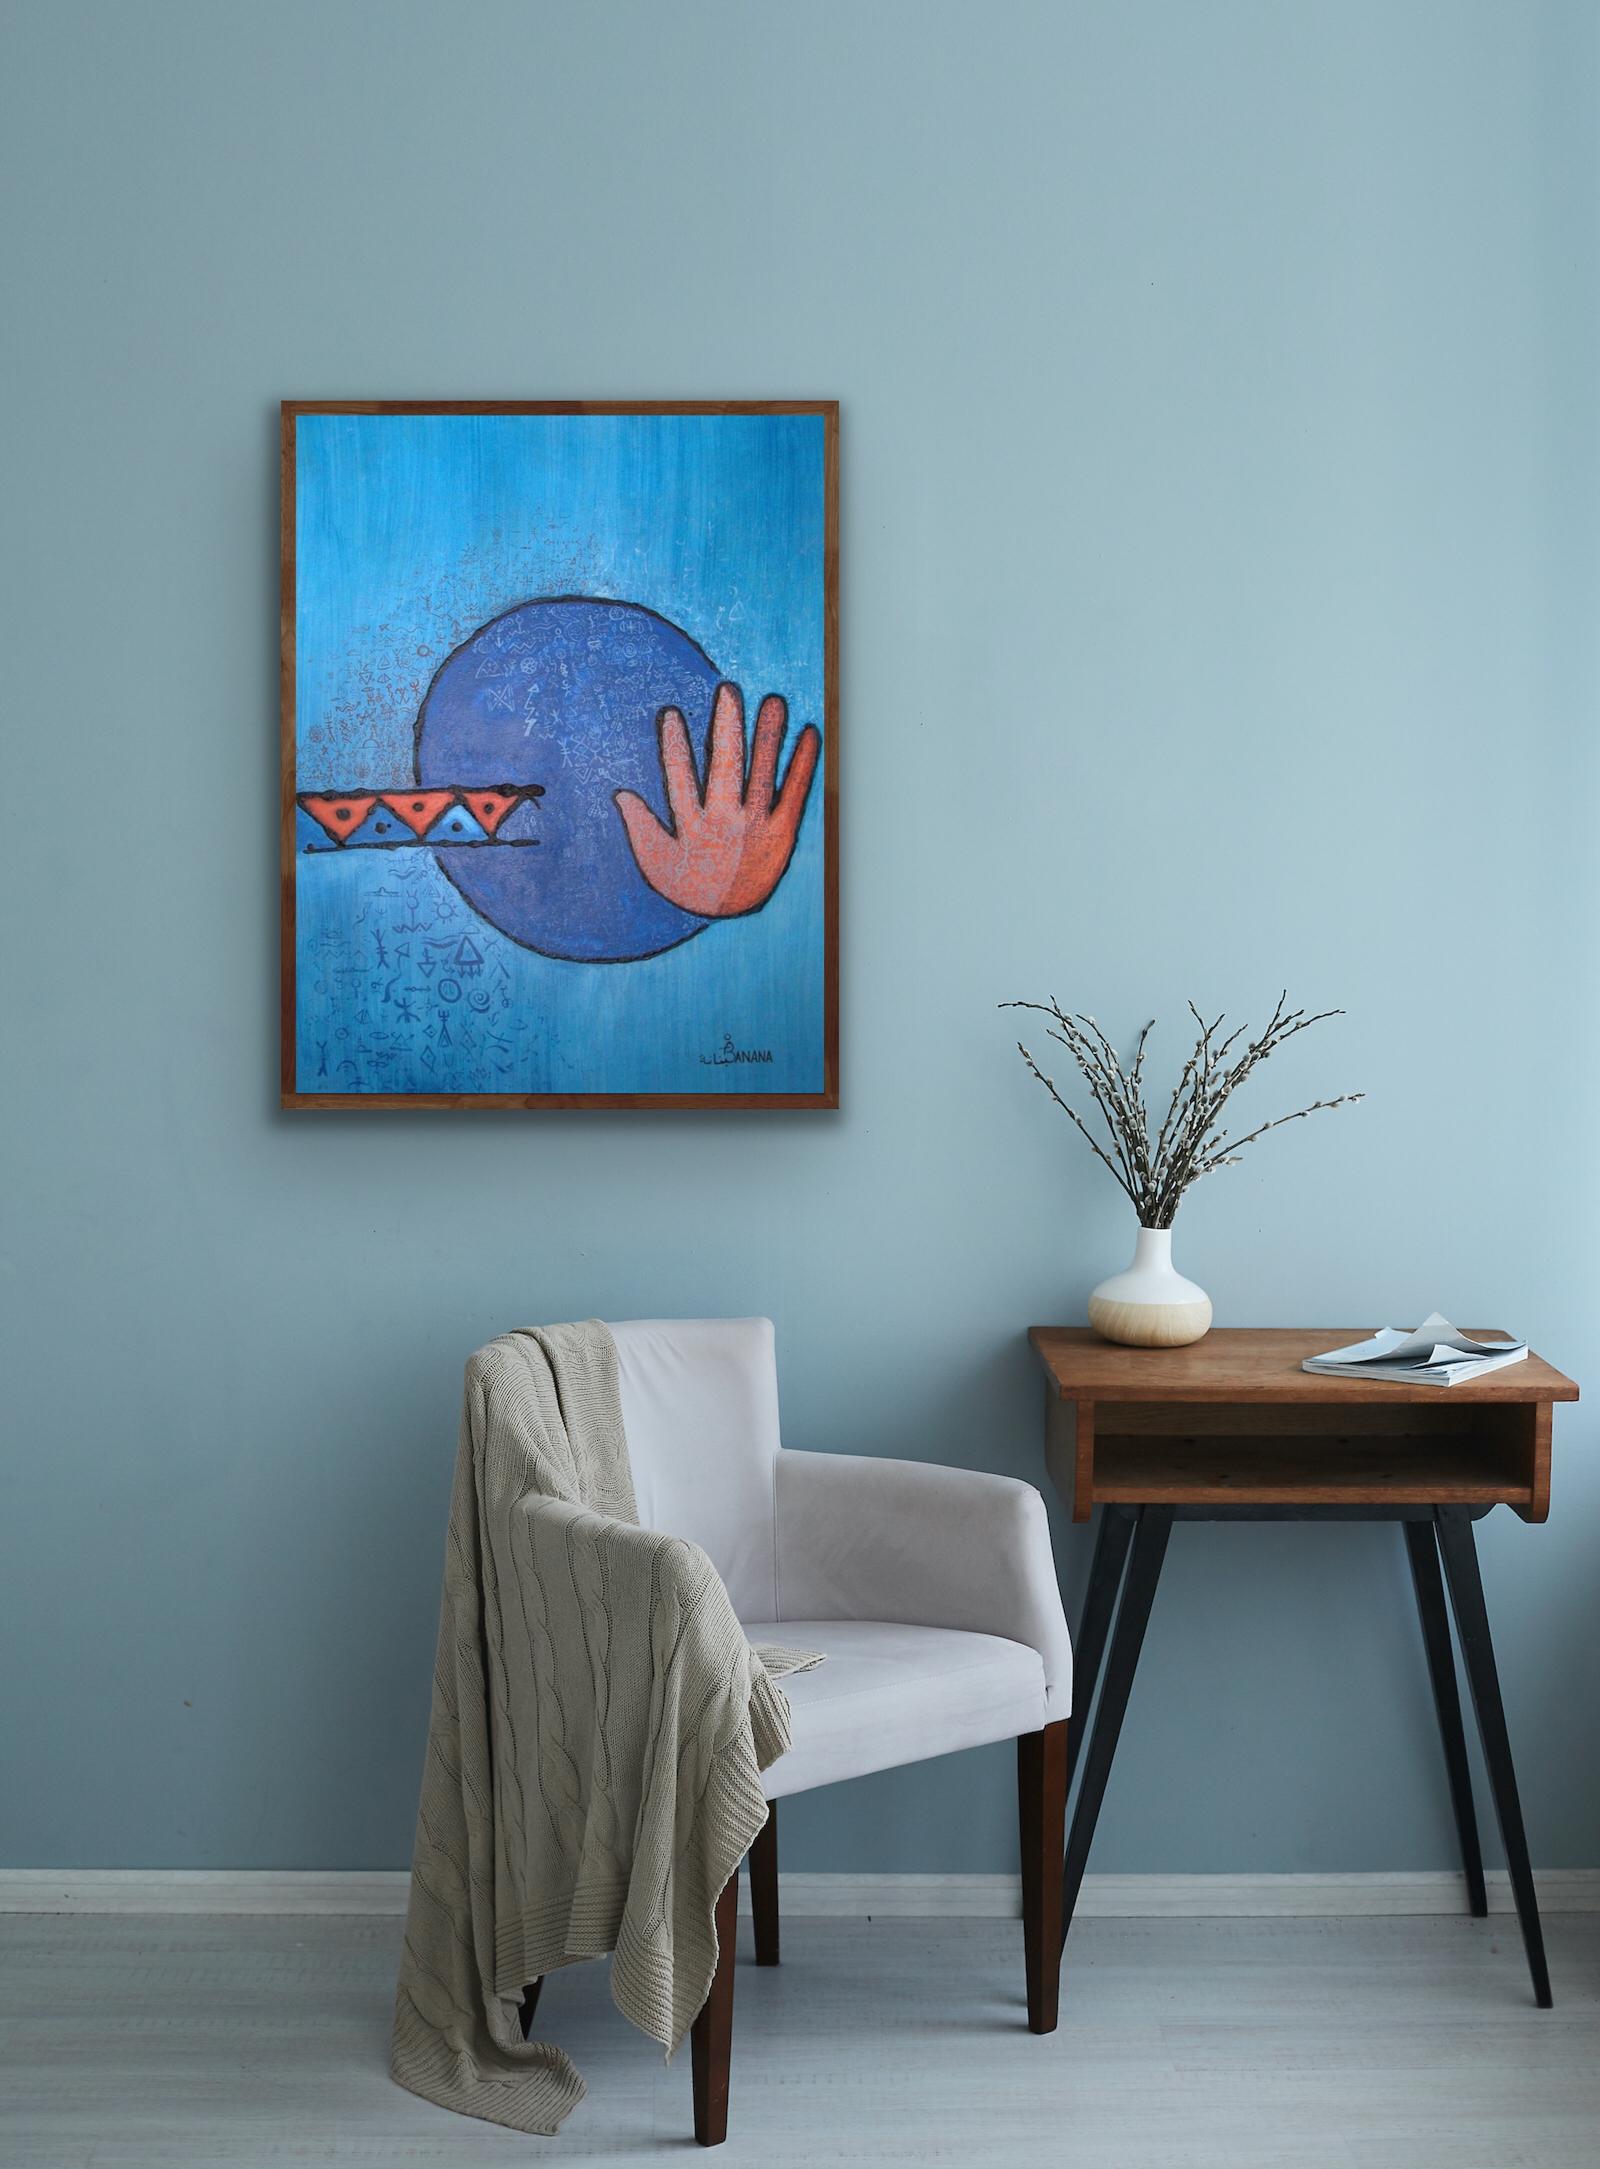 Blue Abstract Painting with hand symbol by Moroccan artist Abderrahman Banana - mixed media on canvas, framed. Signed front, lower right.

Abderraman Banana's painted symbols oscillate between figuration and abstraction. In its figurative state, the